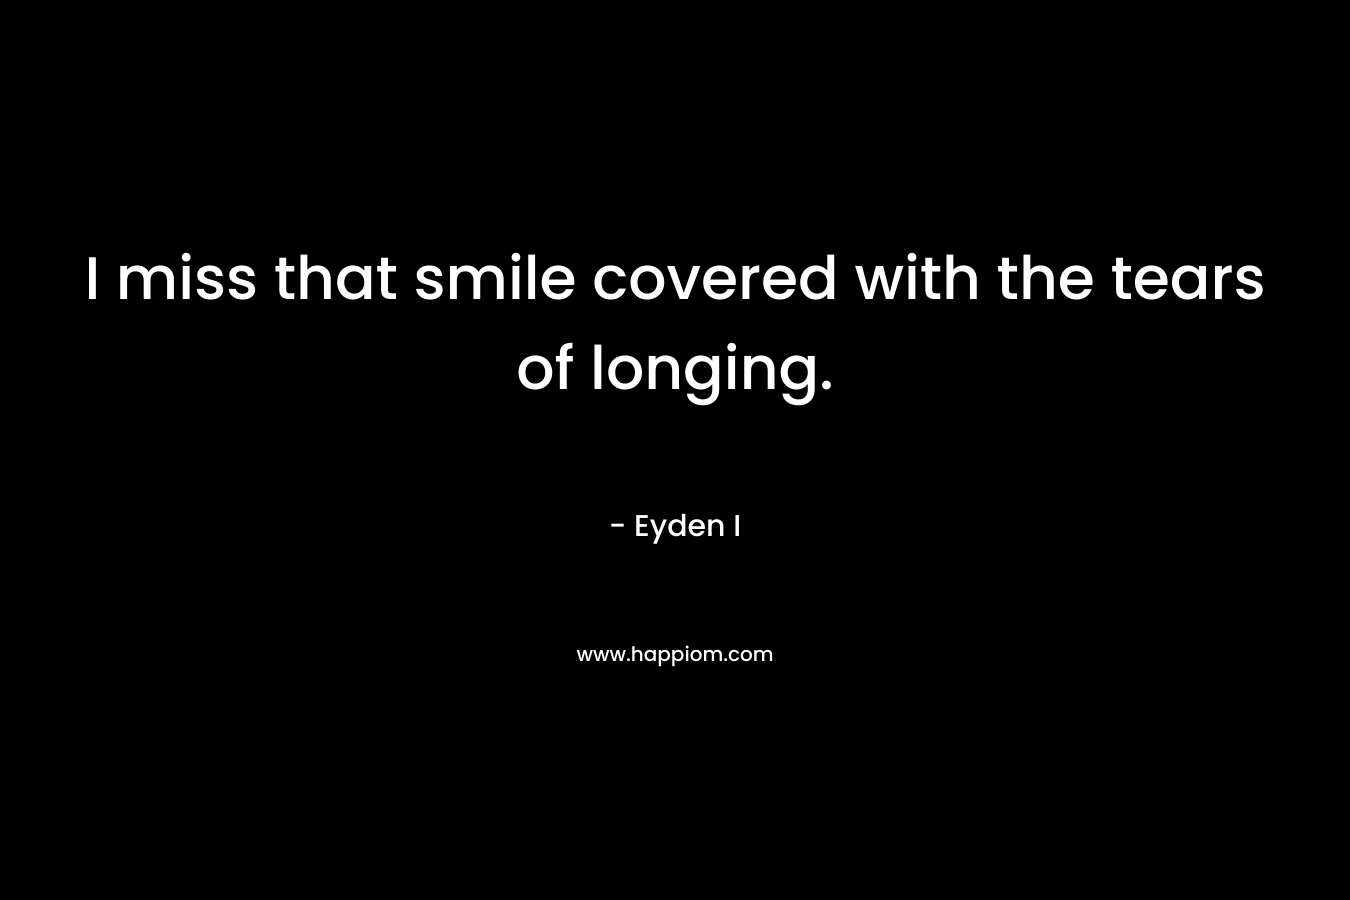 I miss that smile covered with the tears of longing. – Eyden I